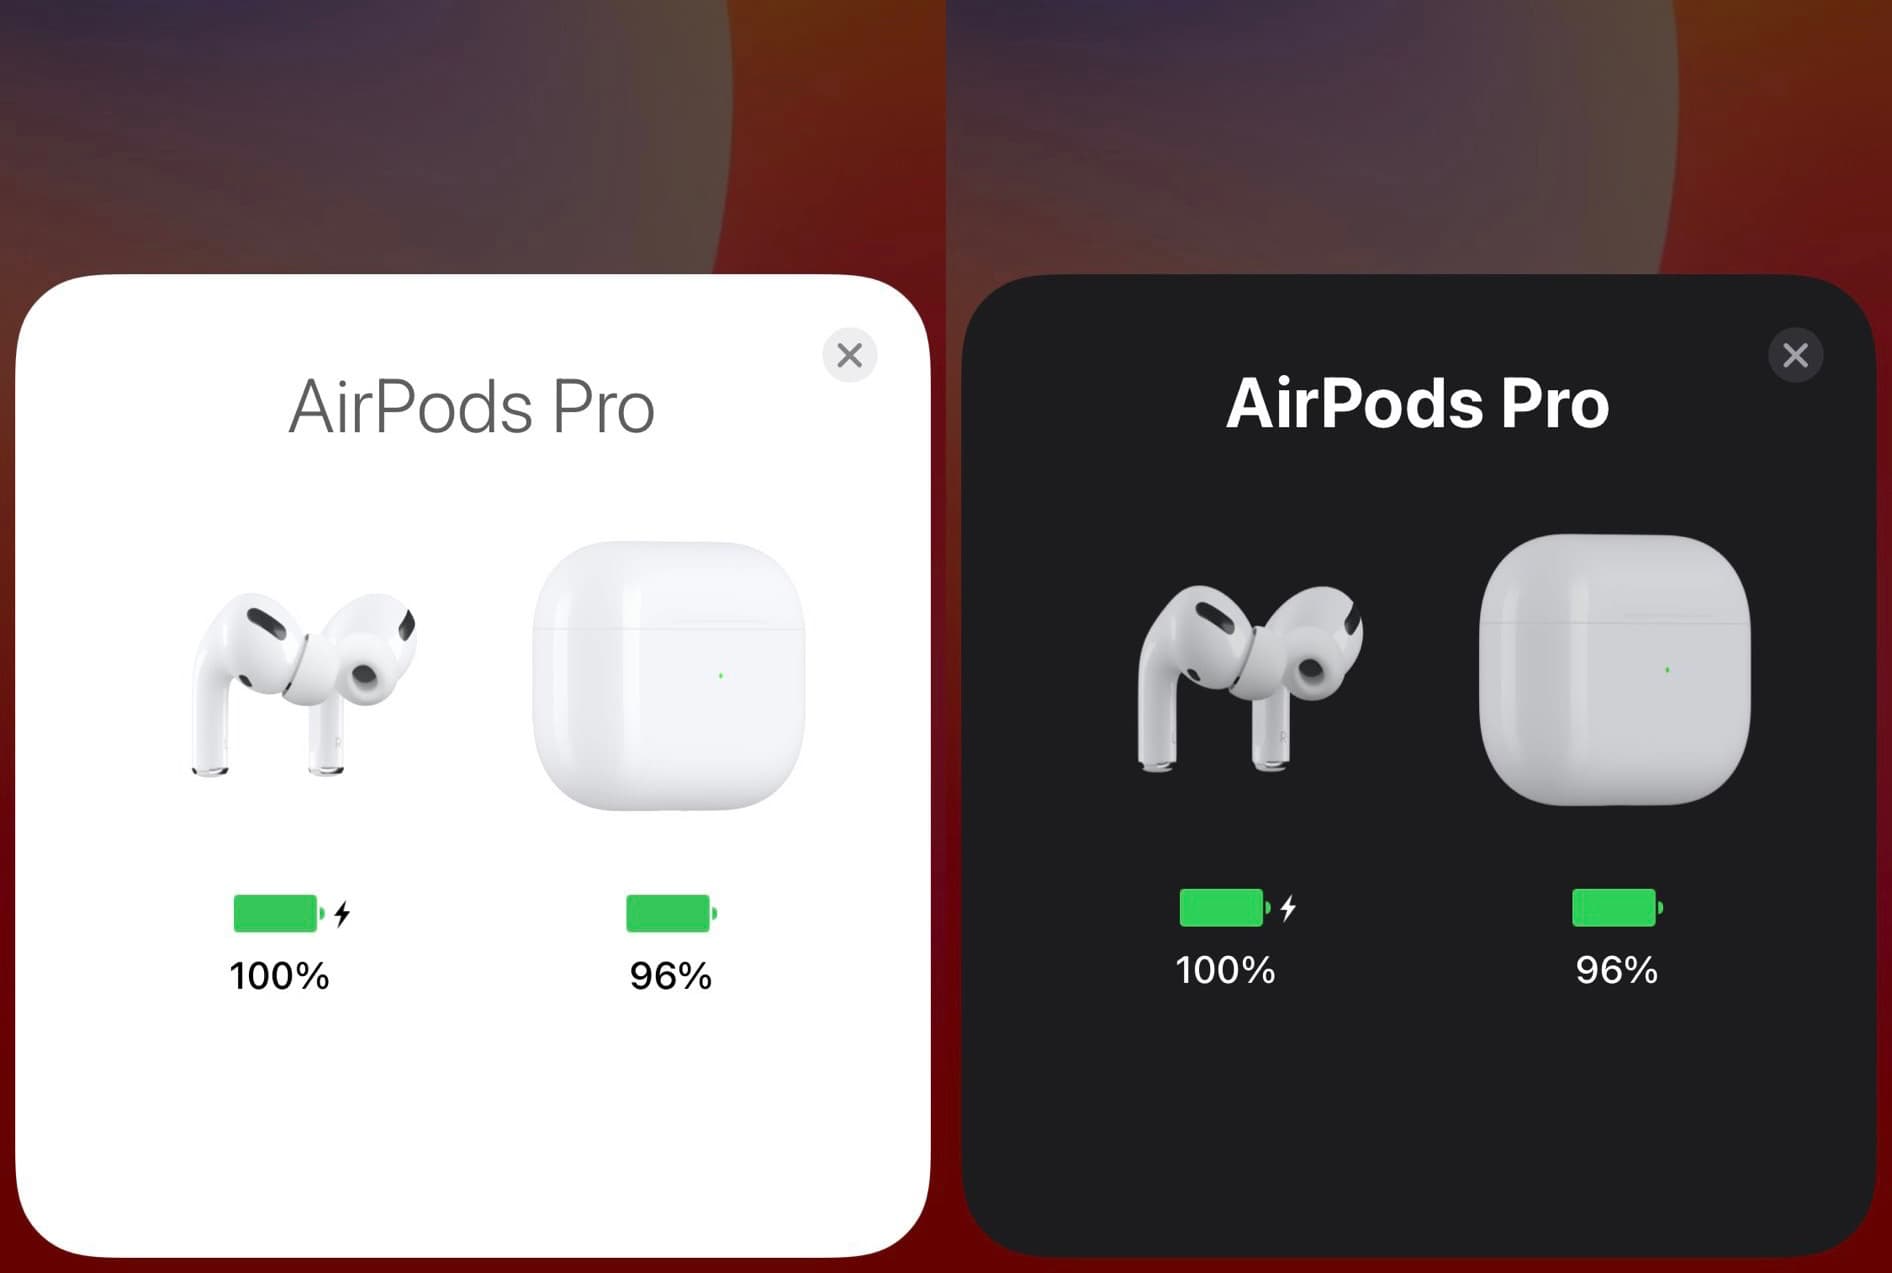 DarkPods forces any iPhone’s AirPods pairing interface to obey the dark mode setting